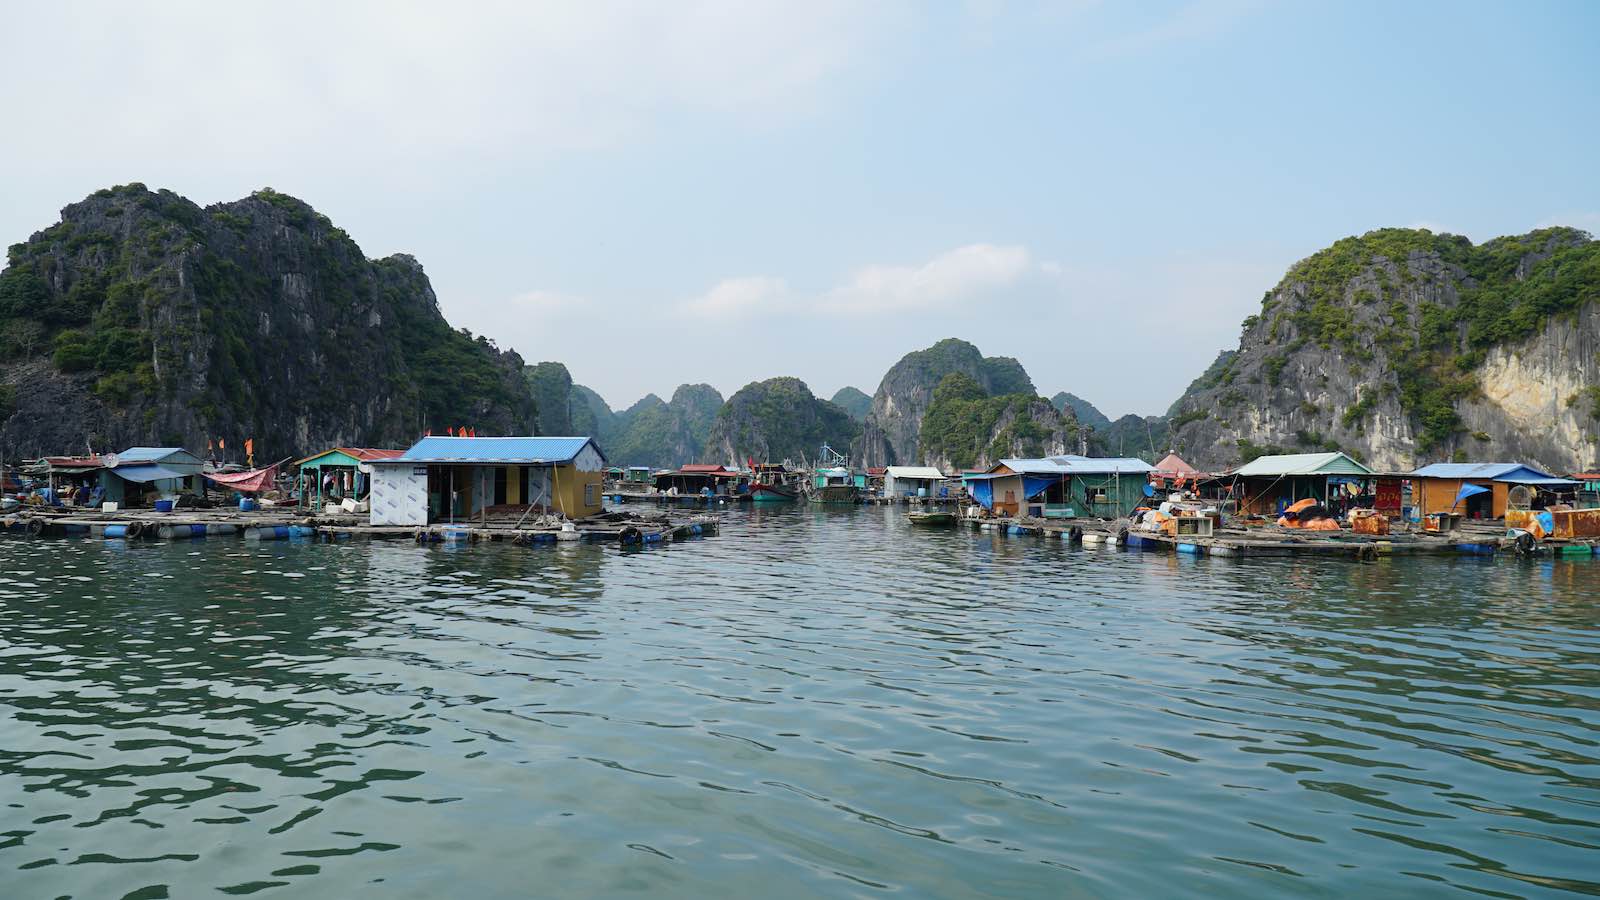 We took a boat through the bay of limestone rock formations and the floating villages underneath them. A lot of families lived on these houses built on floating rafts.